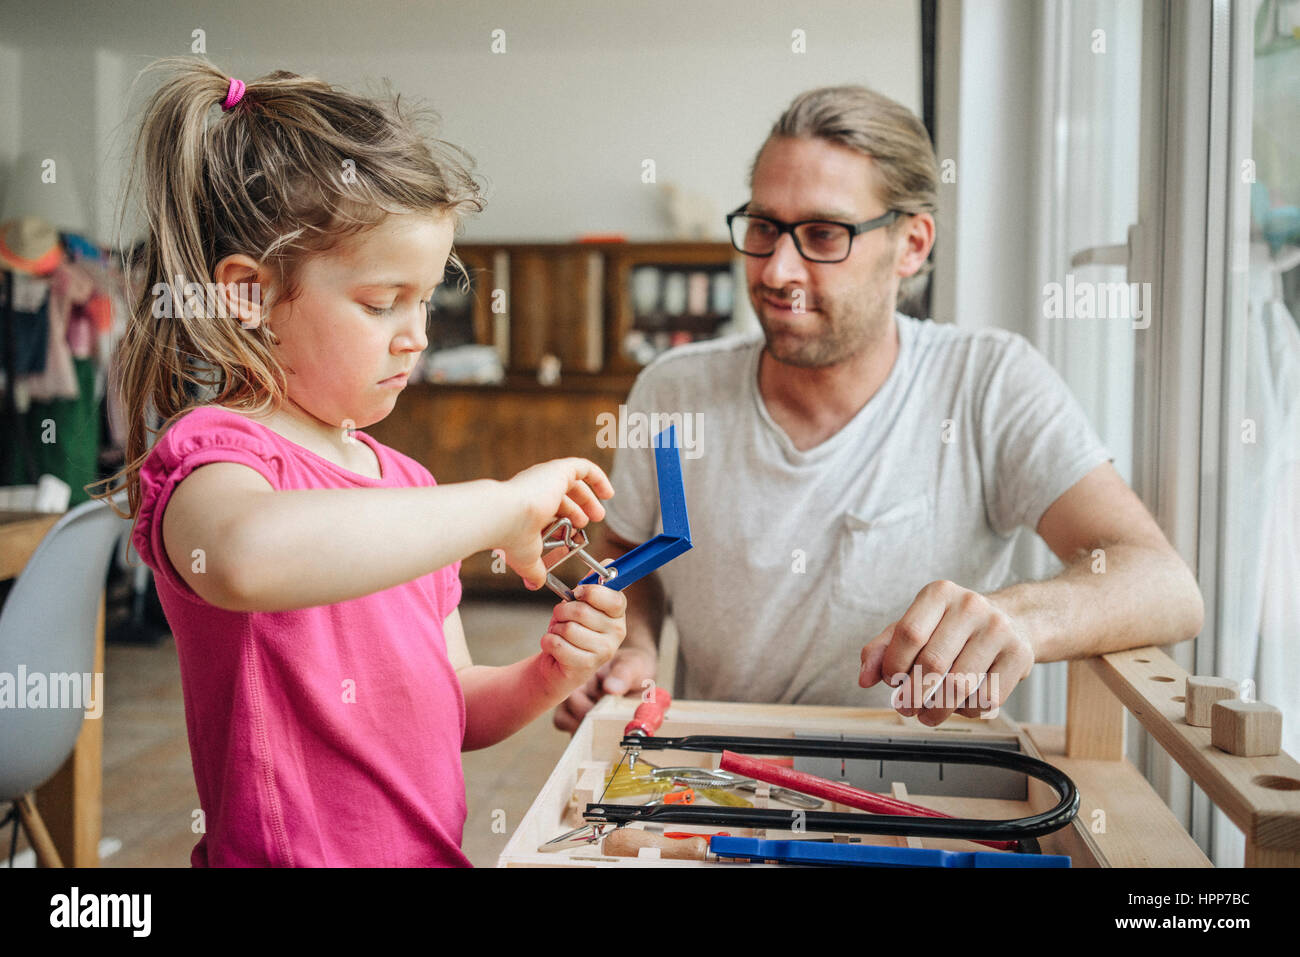 Father looking at daughter working with tools Stock Photo